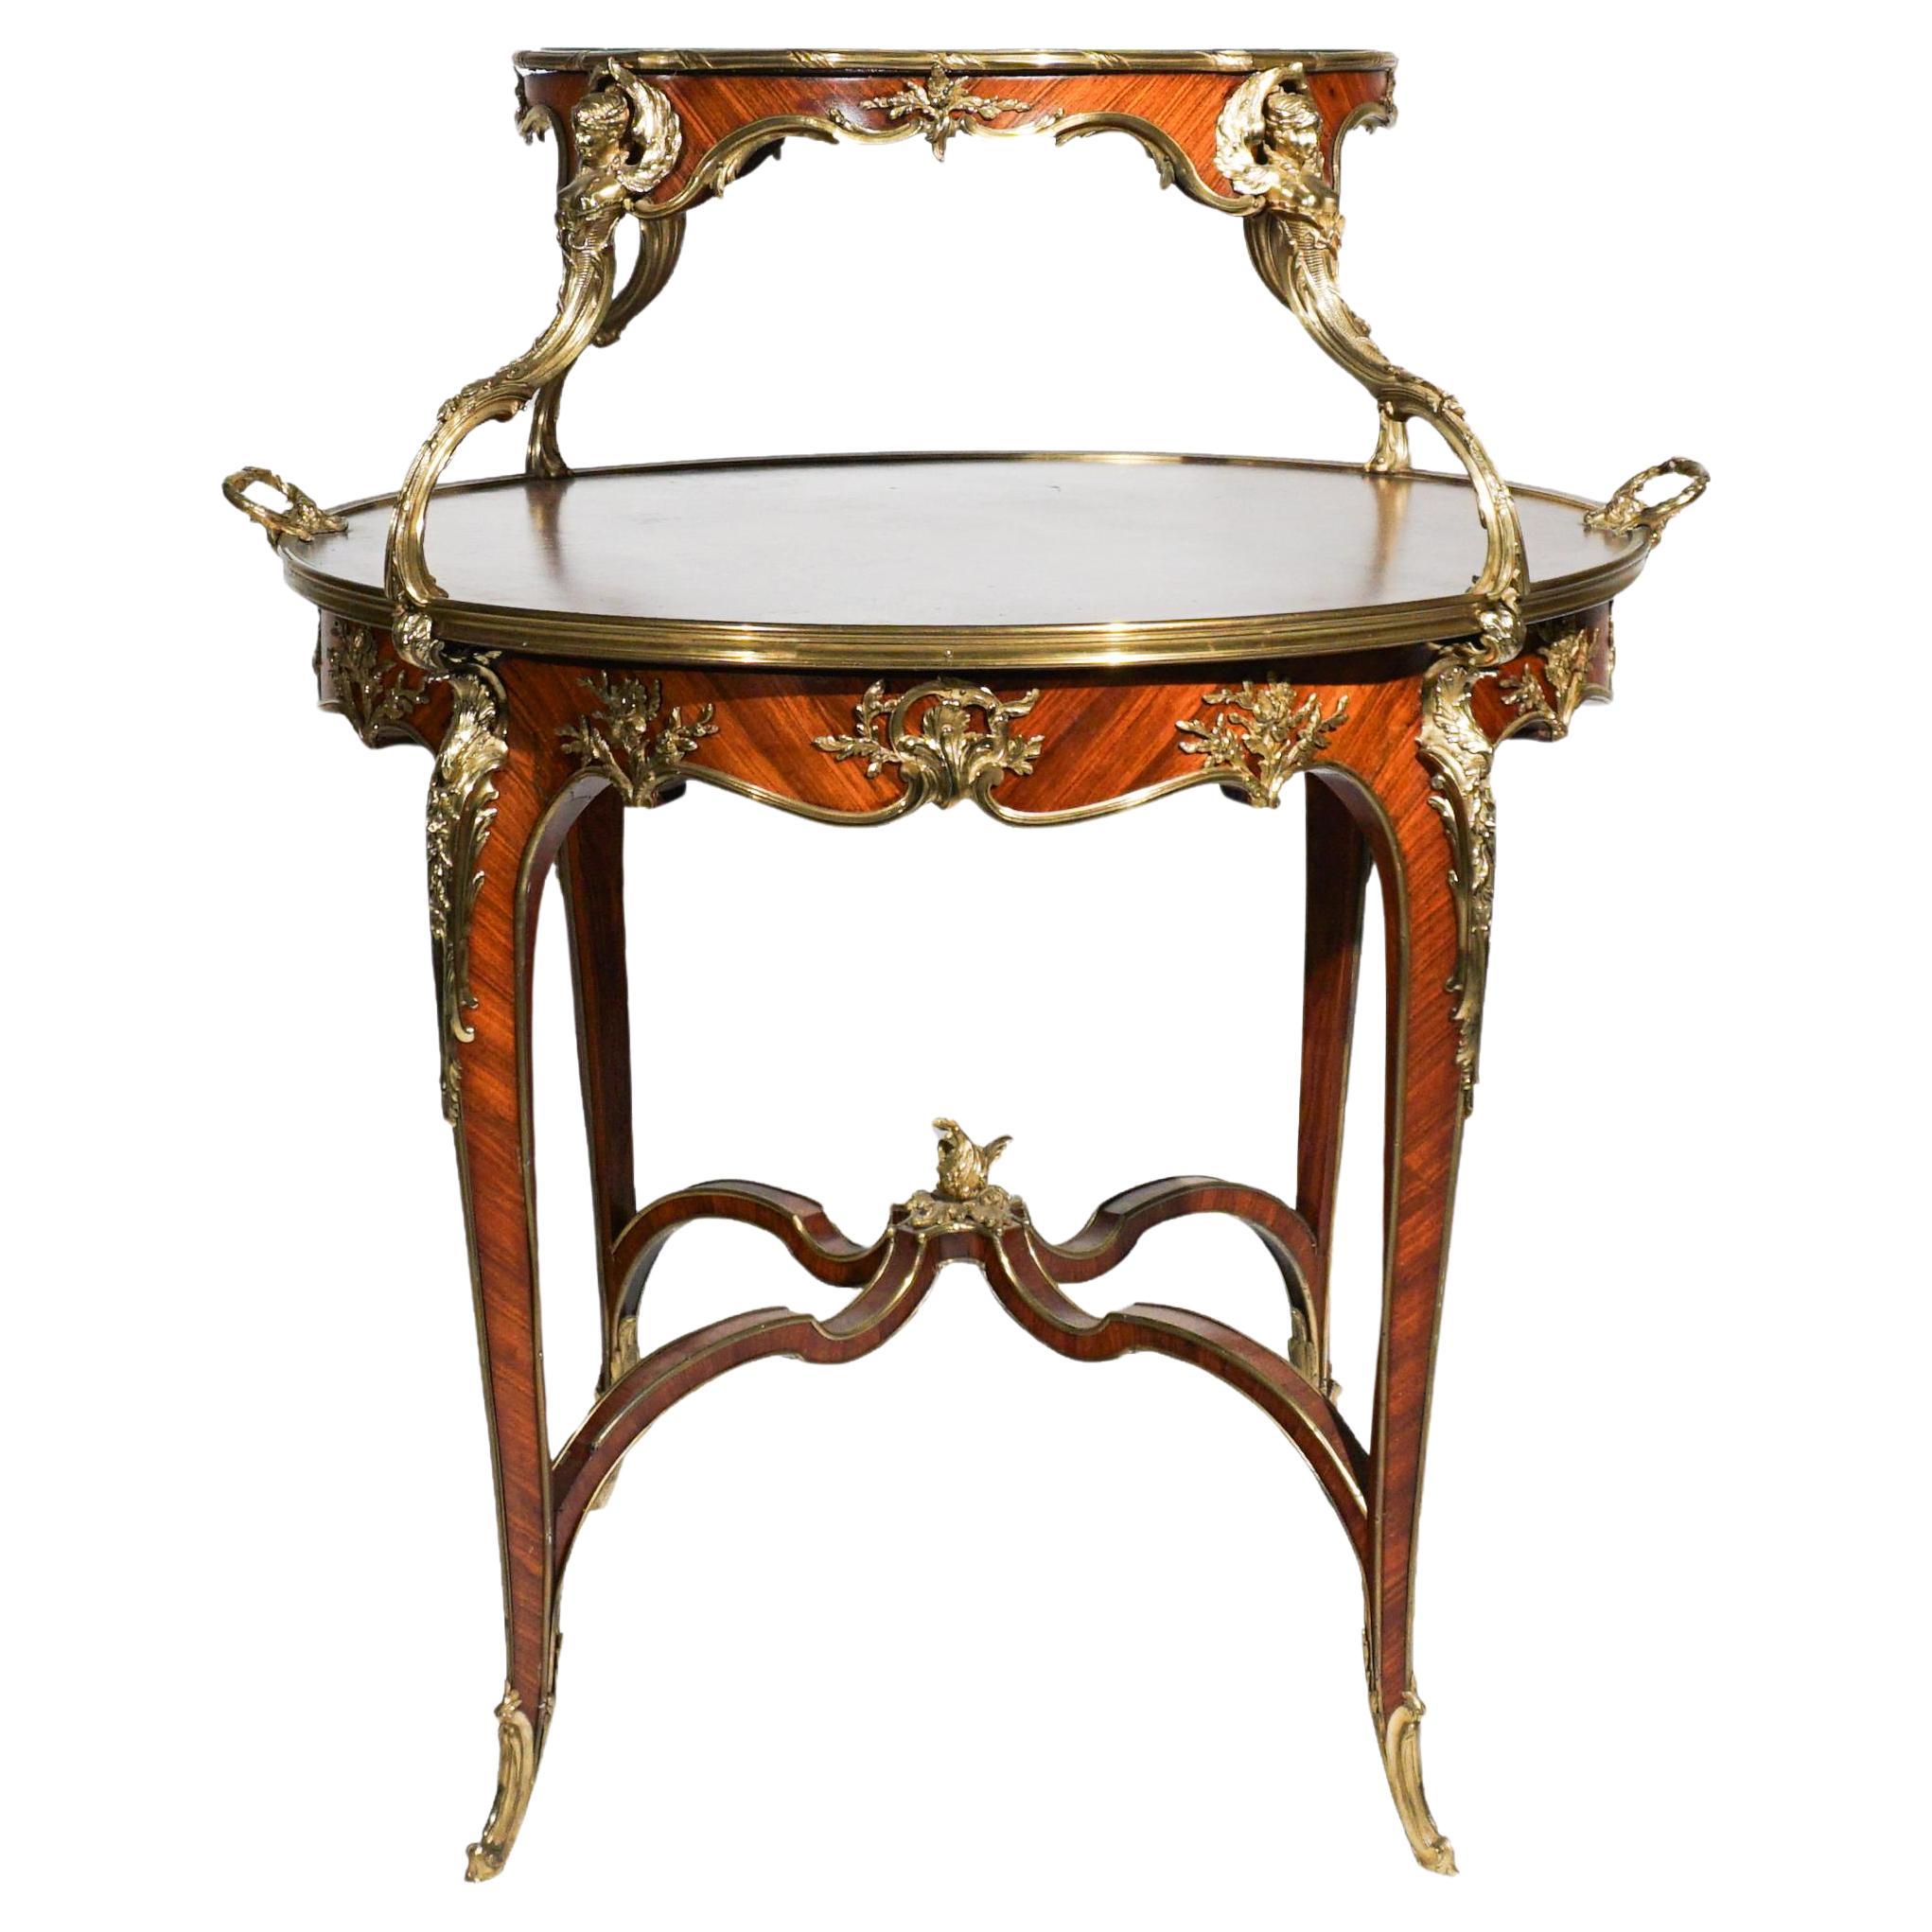 19th C. Joseph E. Zwiemer Kingwood, Satine and Bois de Bout Marquetry Tea Table For Sale